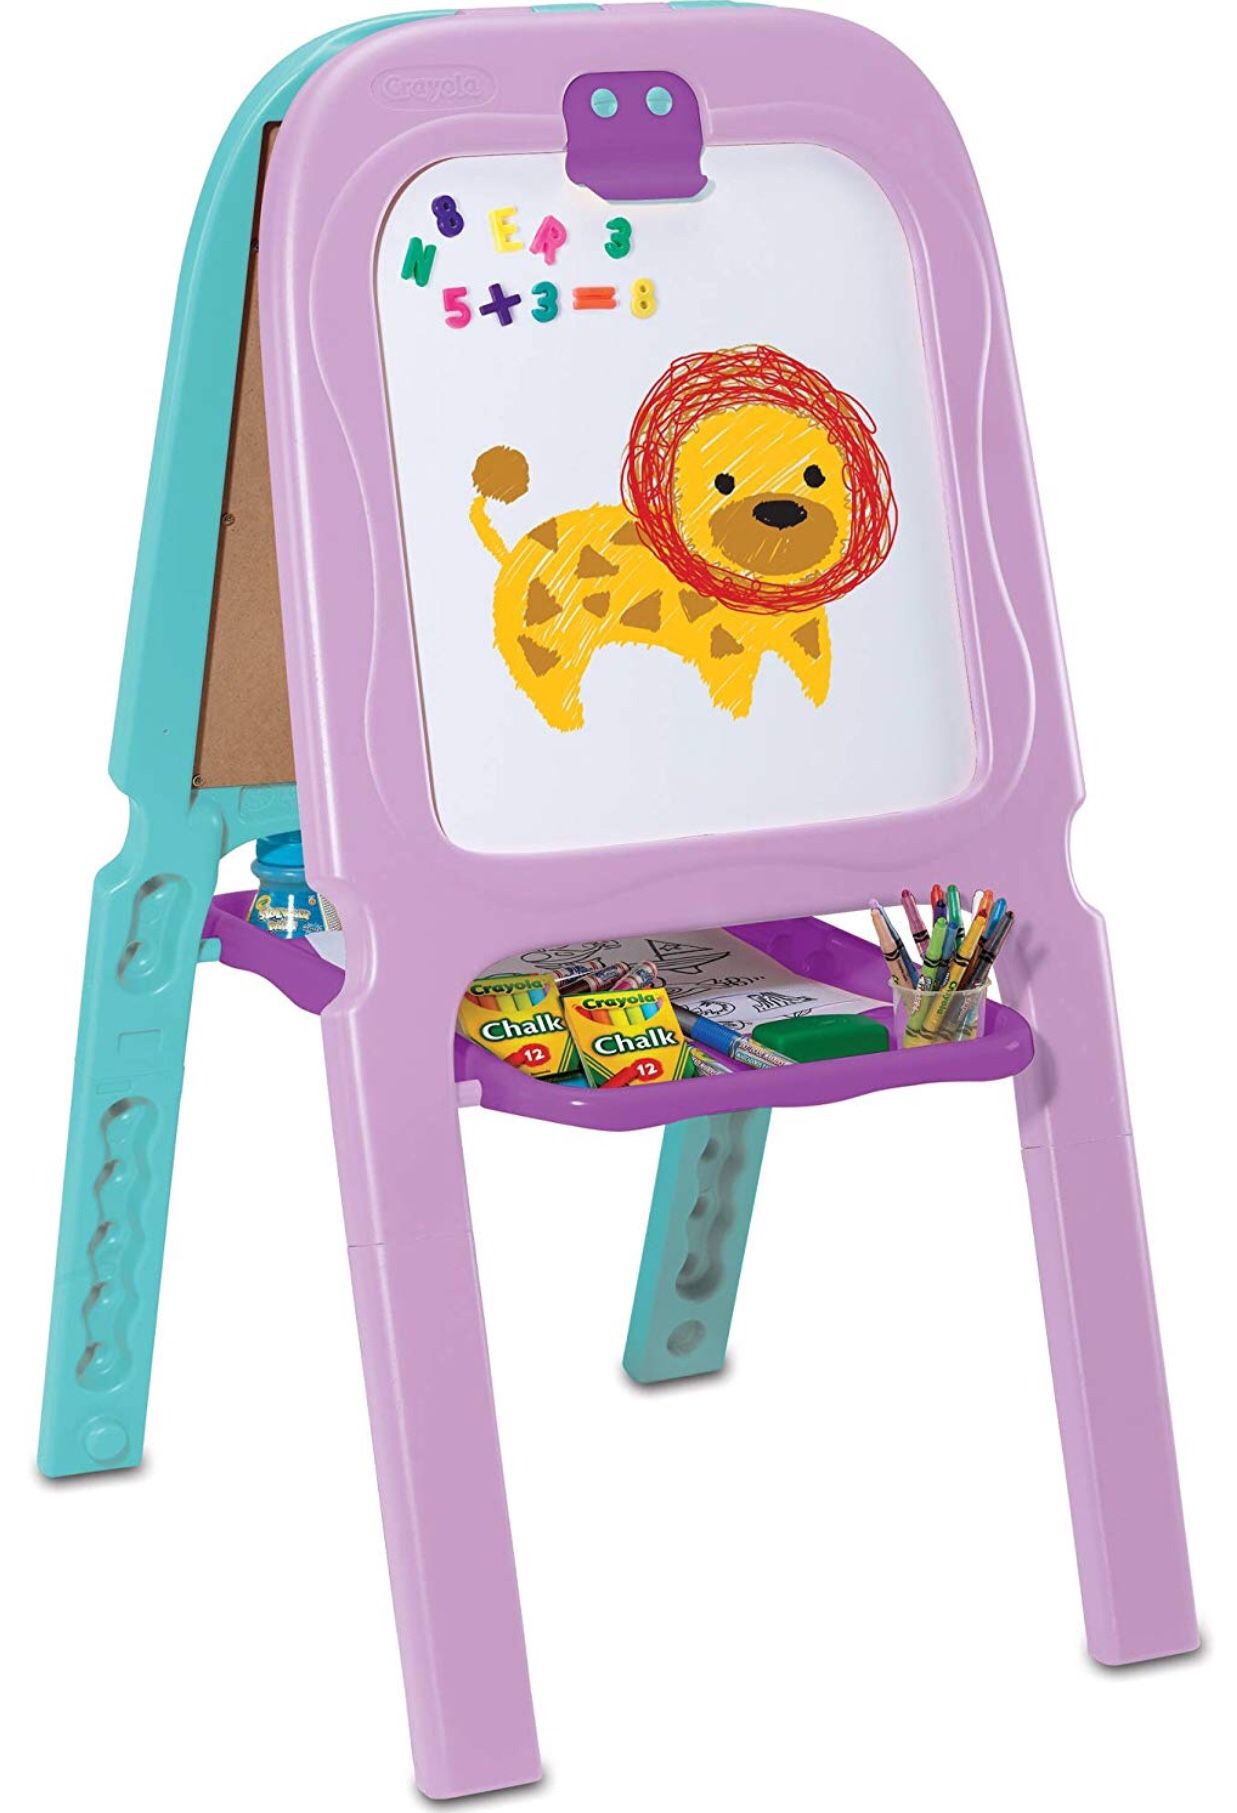 Crayola 3-in-1 Double Easel, Magnetic